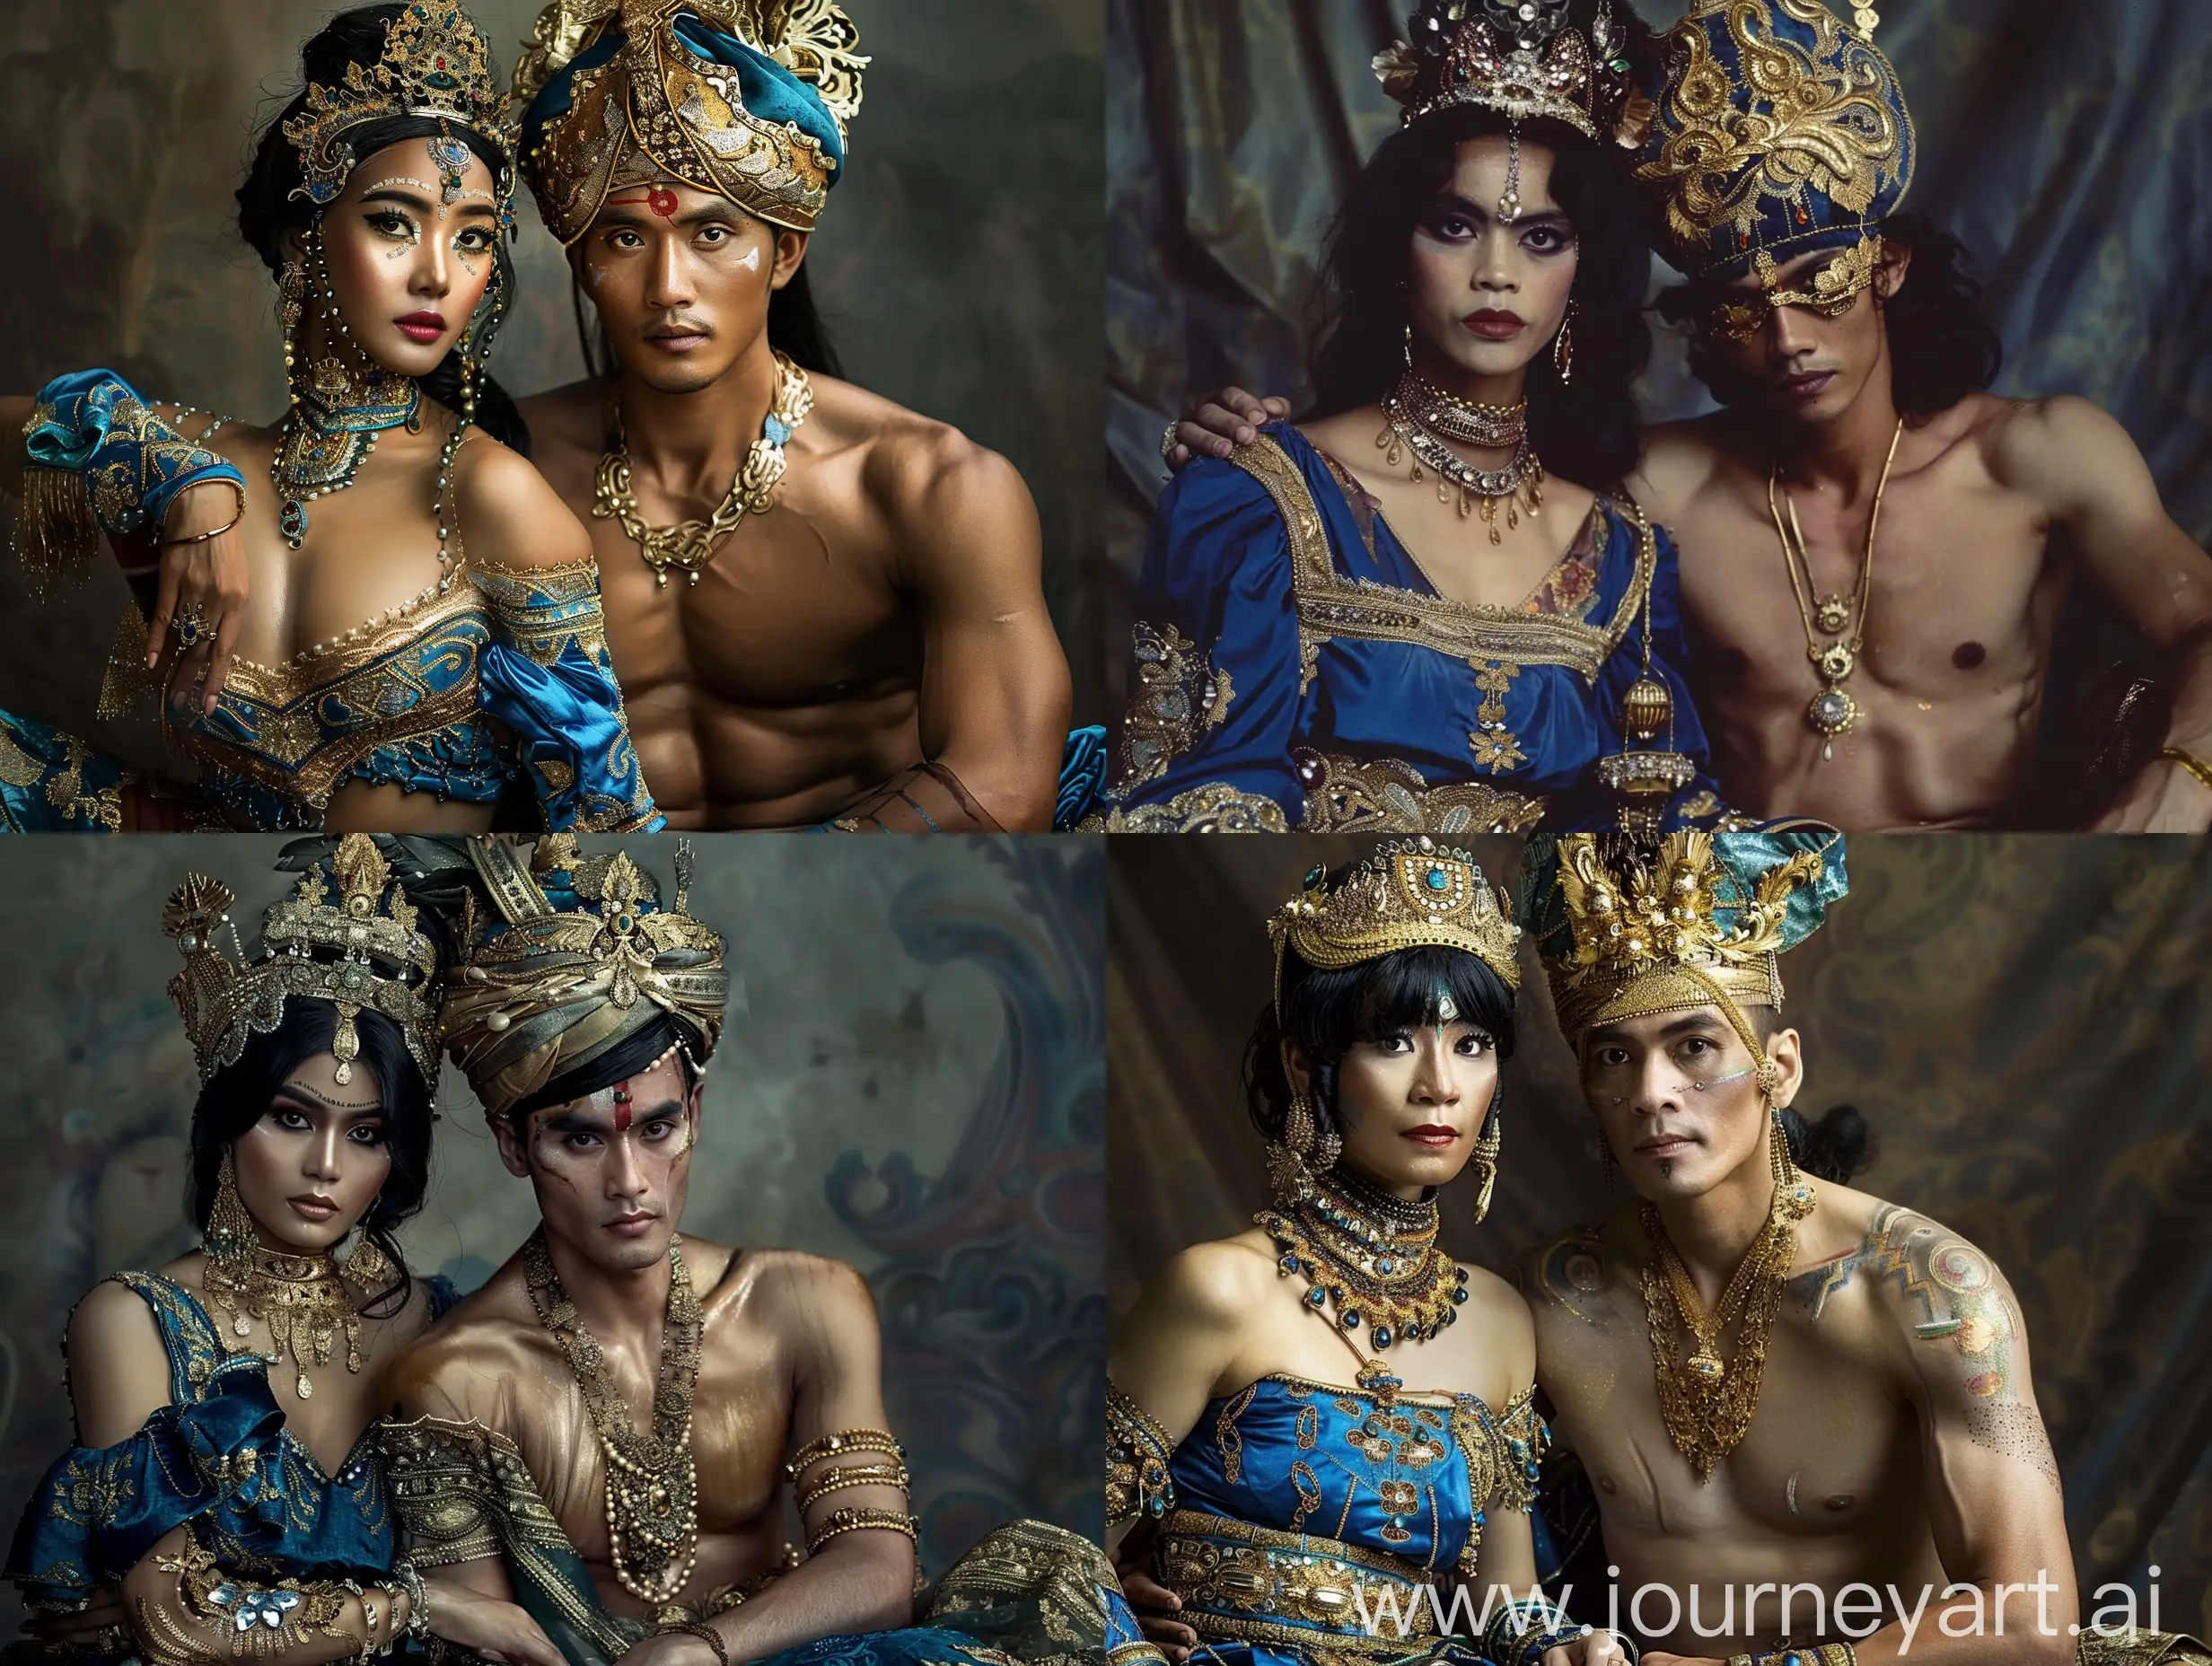 Indonesian-Royal-Couple-in-Ornate-Costumes-with-Elaborate-Jewelry-and-Makeup